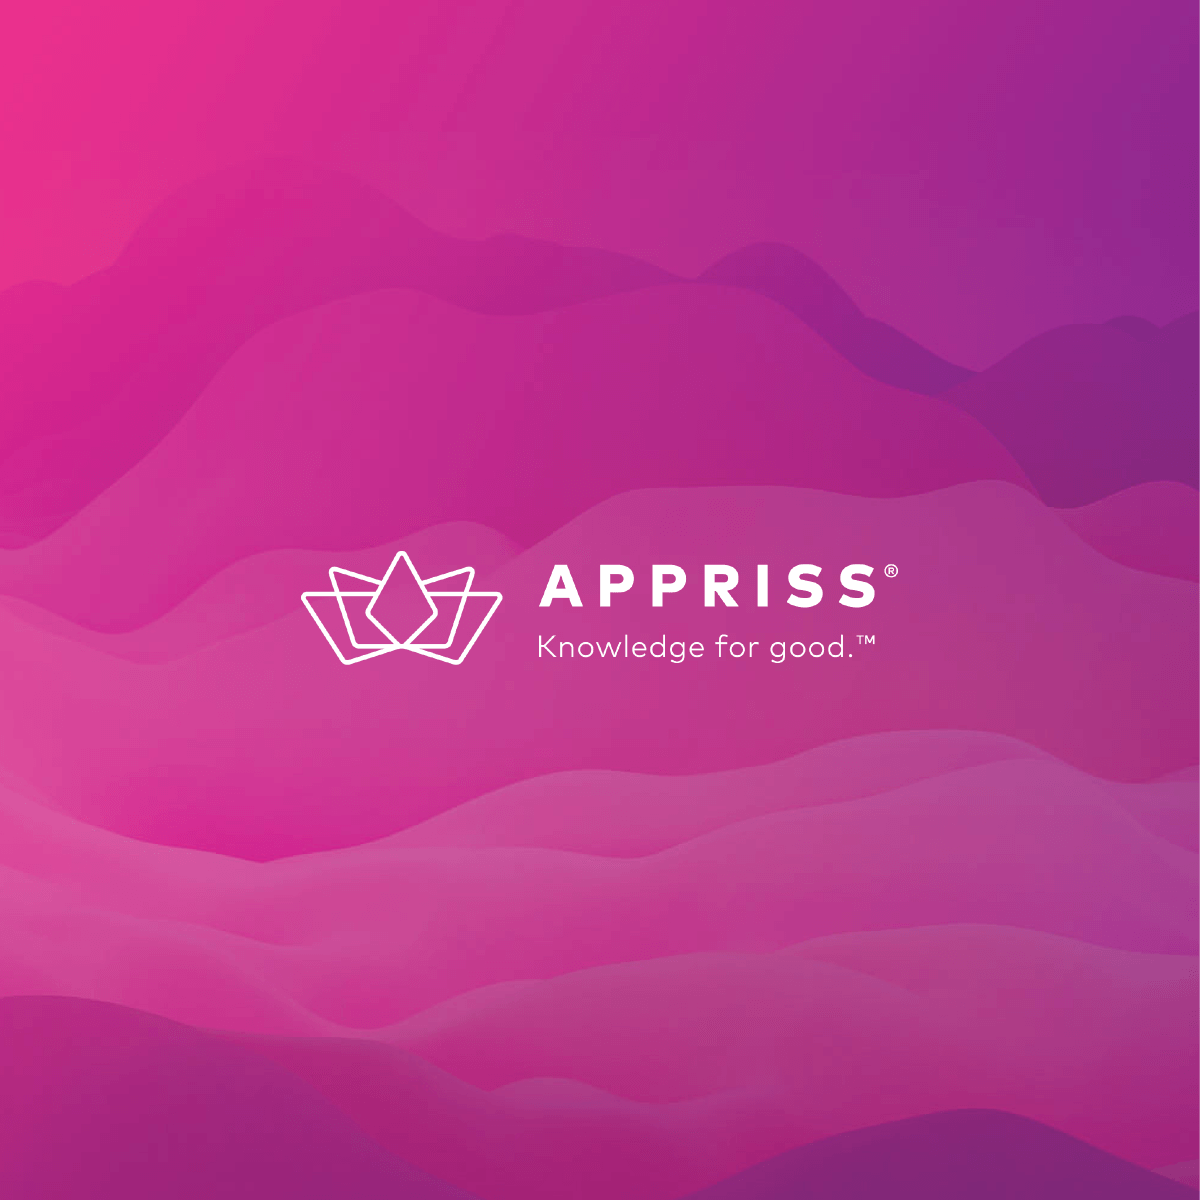 Appriss Logo - Appriss Home is data and analytics, creating knowledge